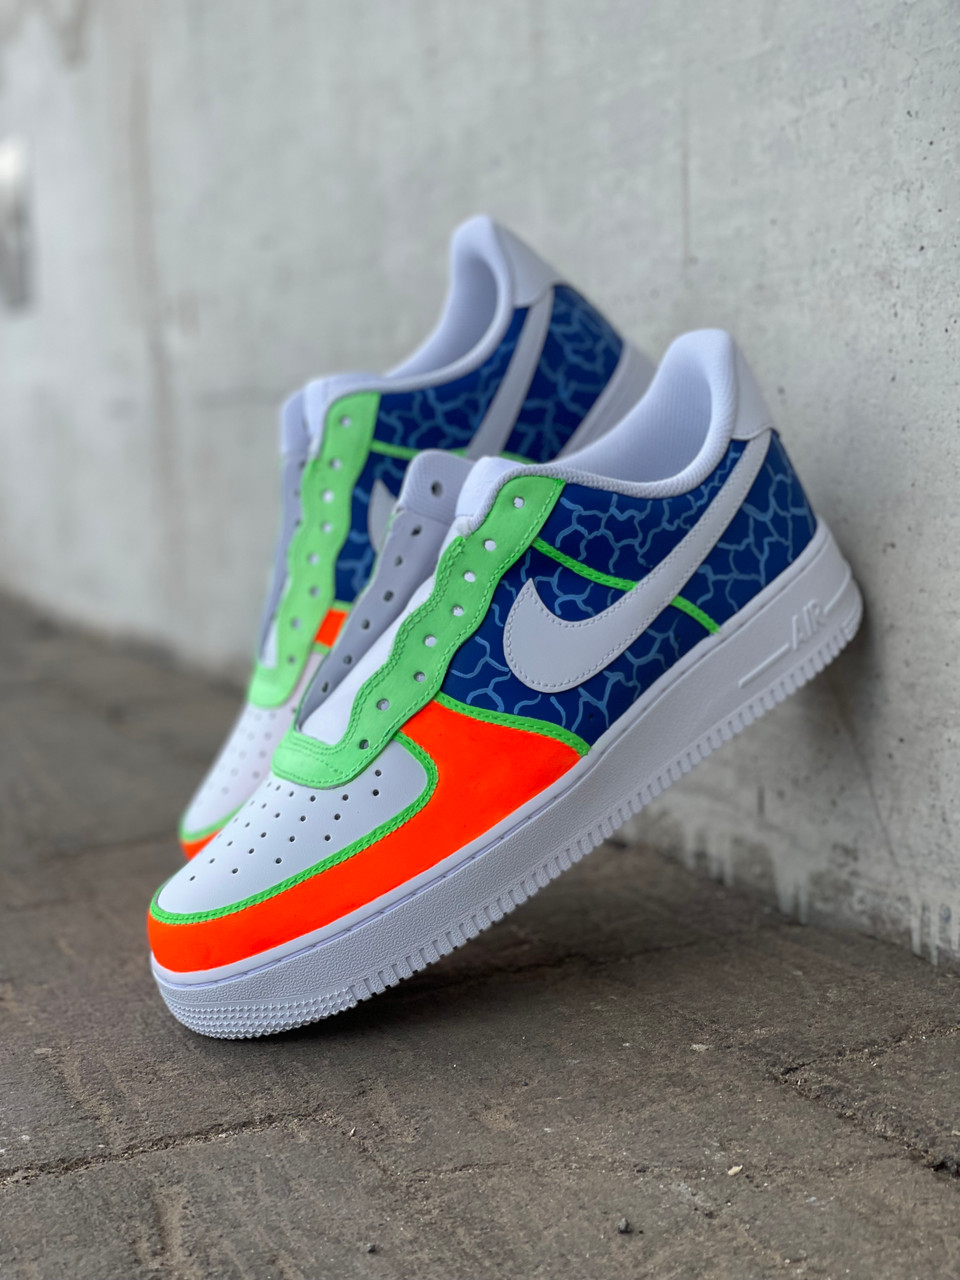 Sneakers  Womens Nike Air Force 1 Airbrush Custom Graffiti Painted Shoes  Art Style Hiphop Fashion